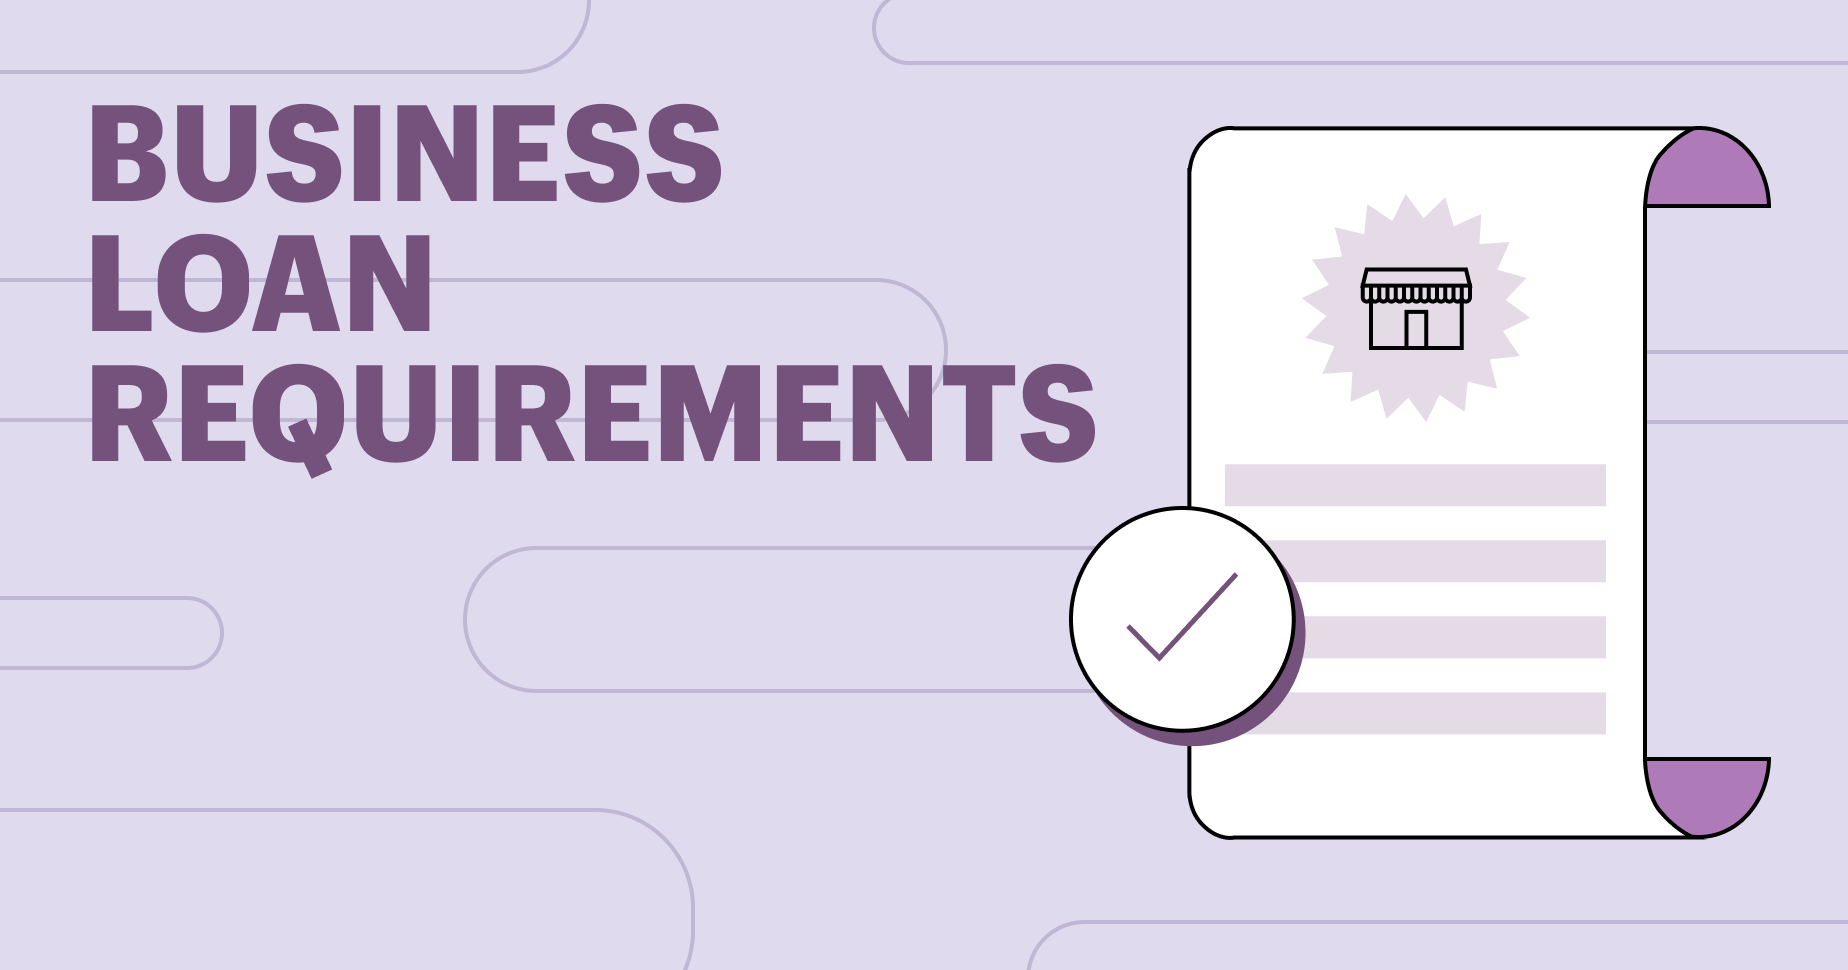 business load requirements text on left side: right side is a document with a check mark all on a lavender background